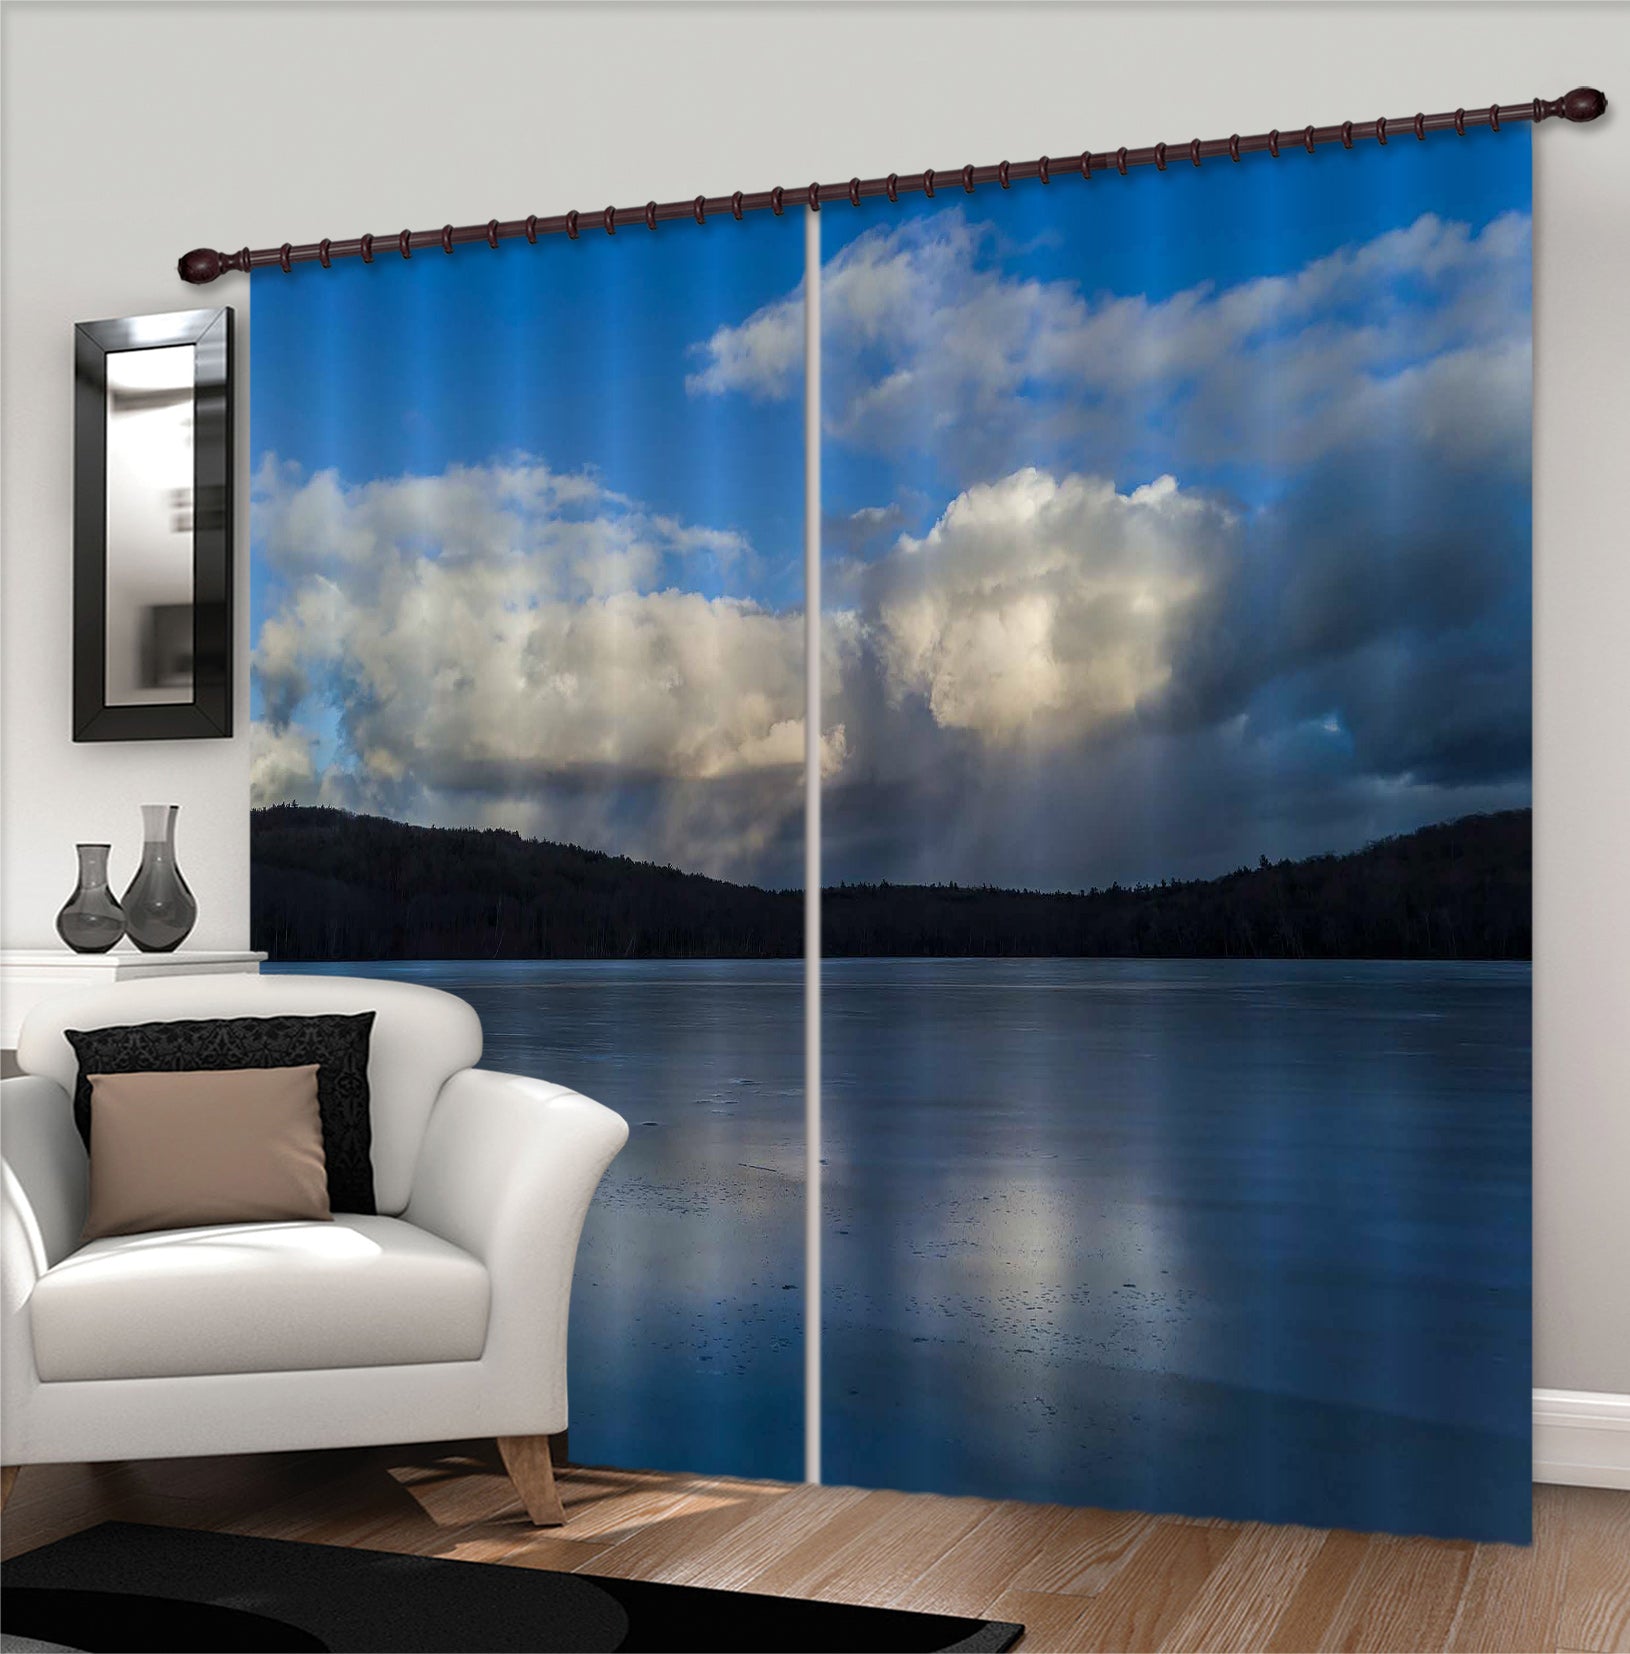 3D Forest Lake 022 Jerry LoFaro Curtain Curtains Drapes